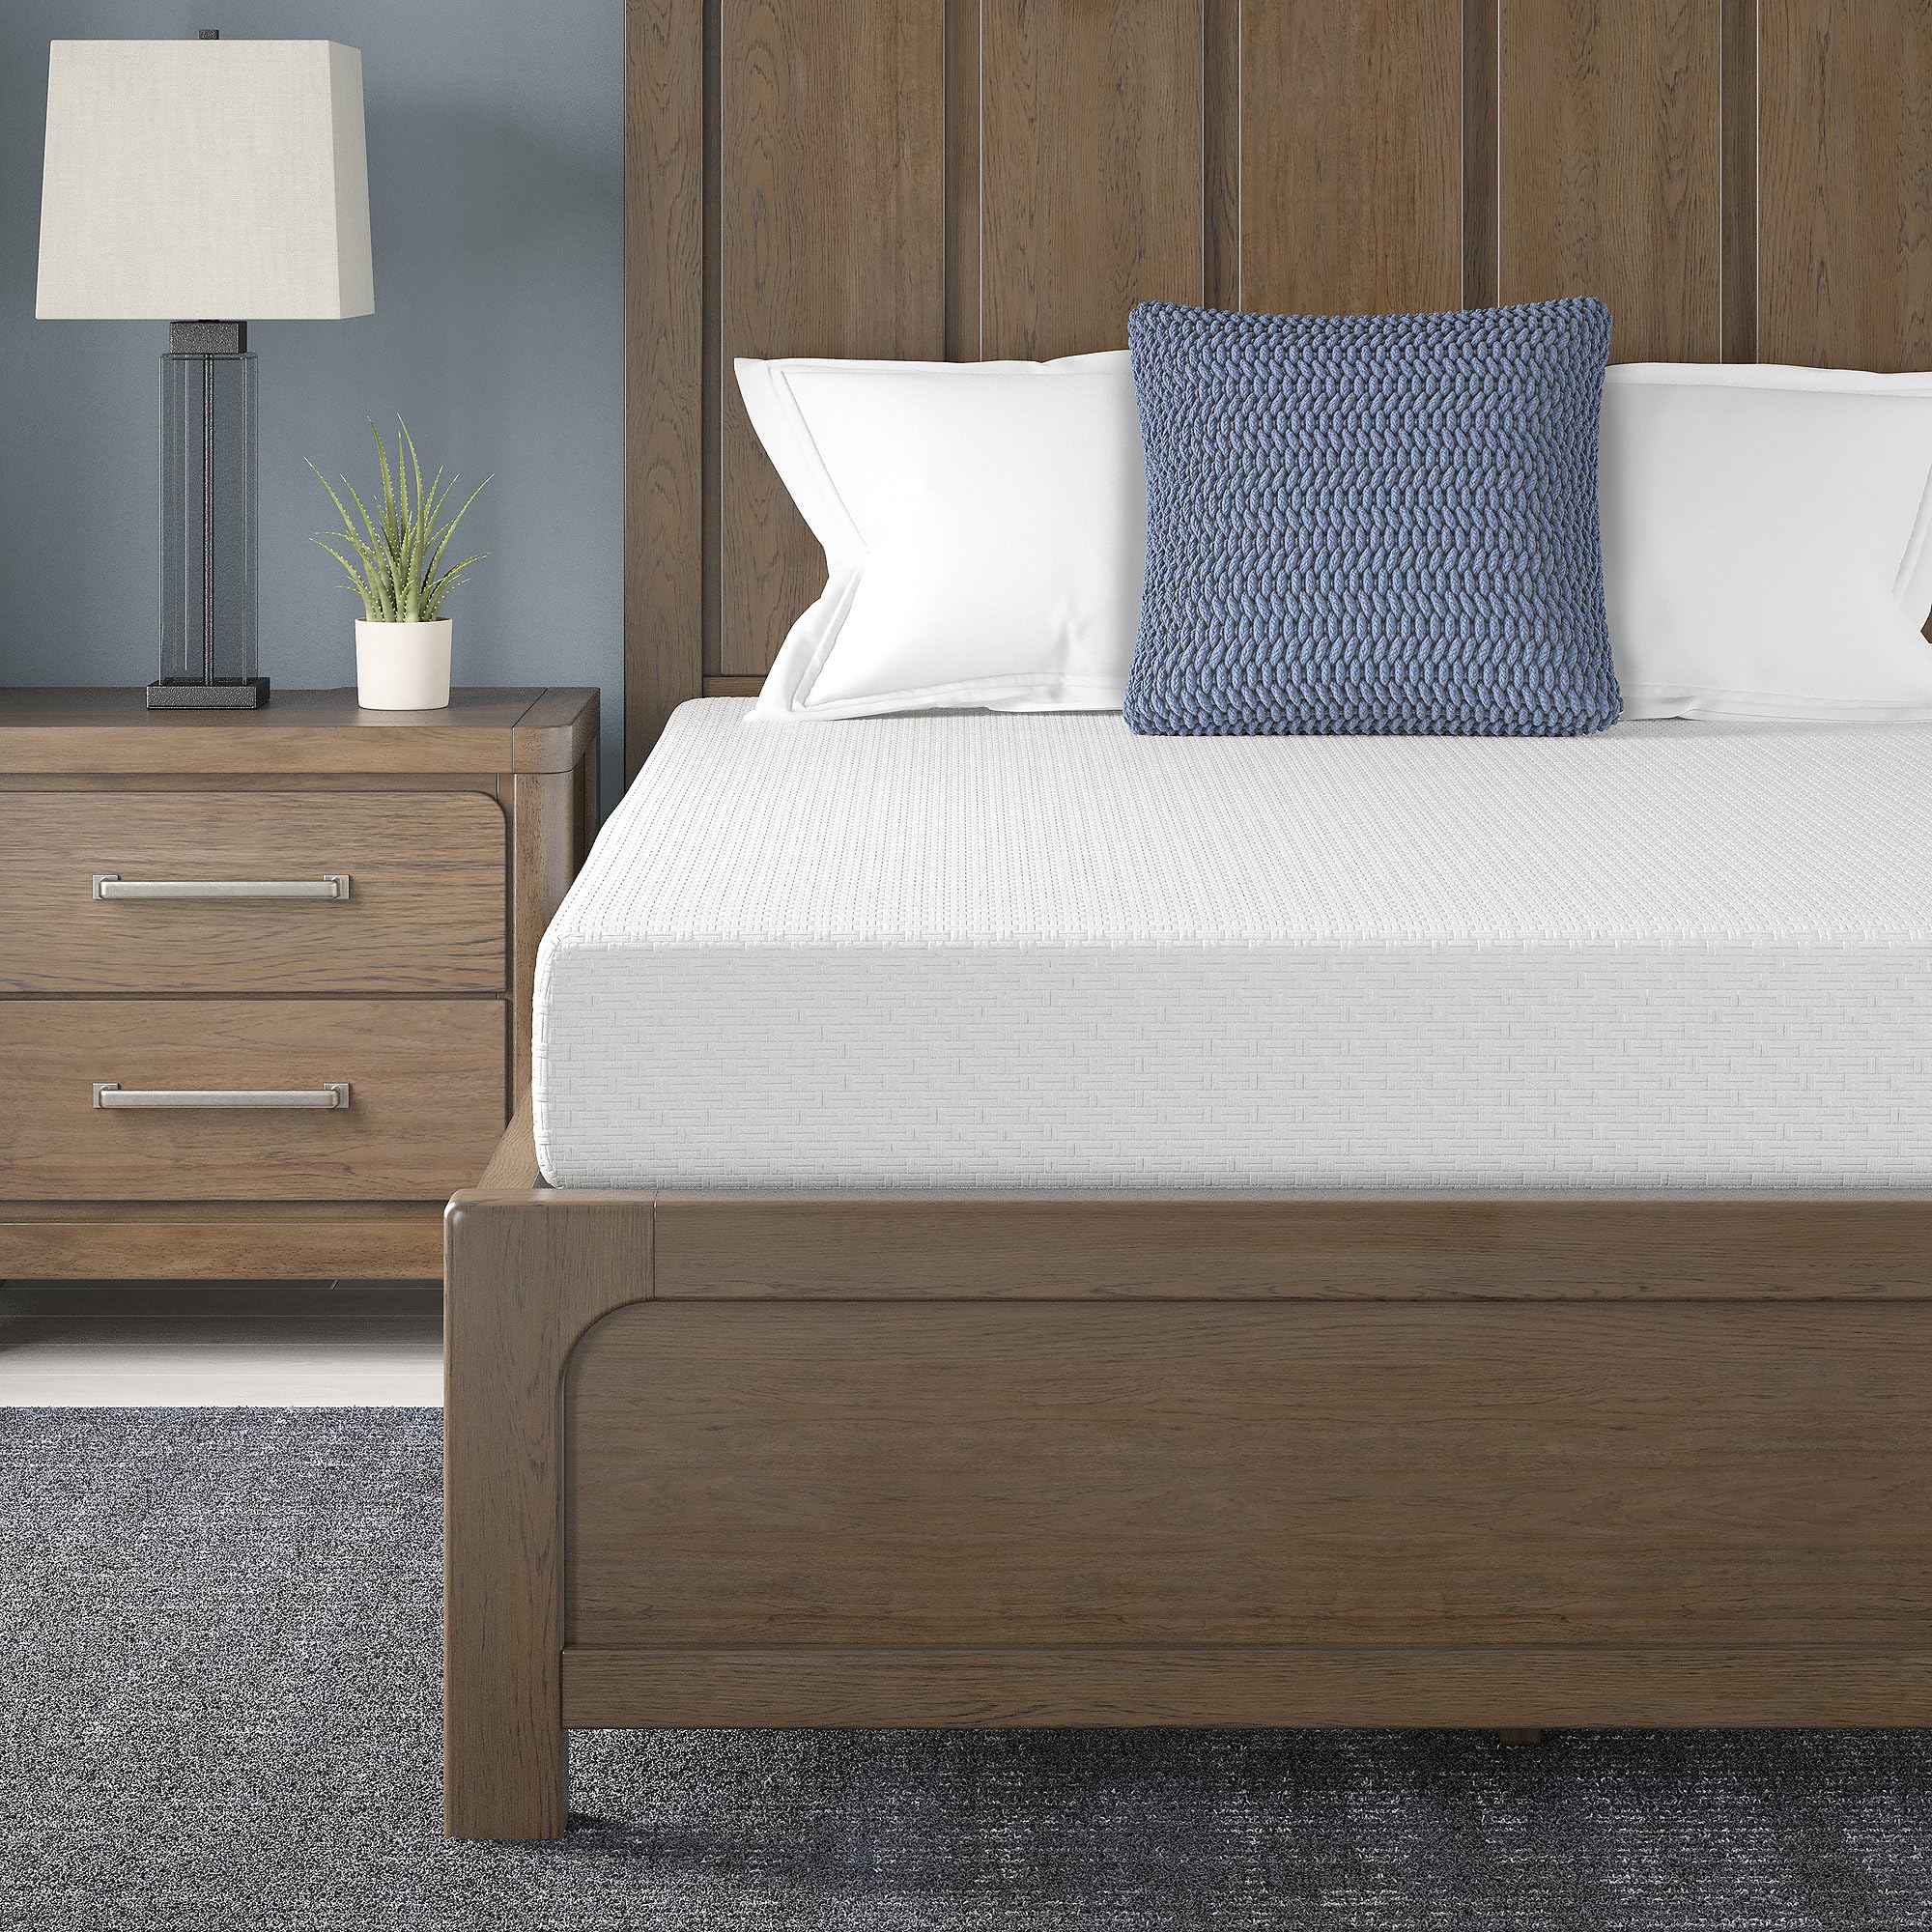 Signature Design by Ashley Full Size Chime 8 Inch Medium Firm Memory Foam Mattress with Green Tea & Charcoal Extract